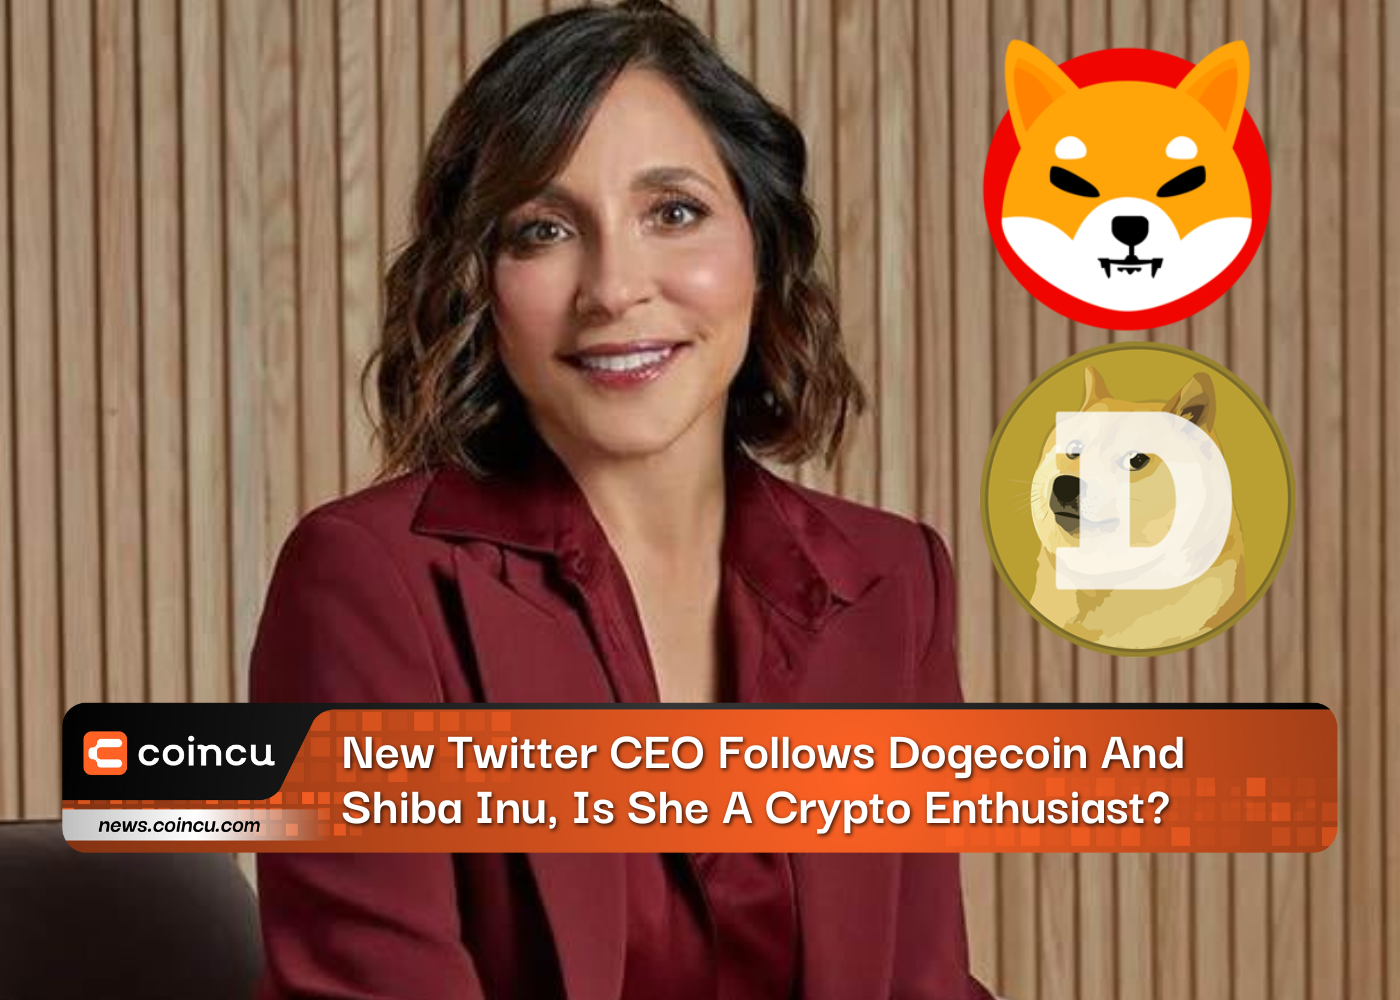 New Twitter CEO Follows Dogecoin And Shiba Inu, Is She A Crypto Enthusiast?